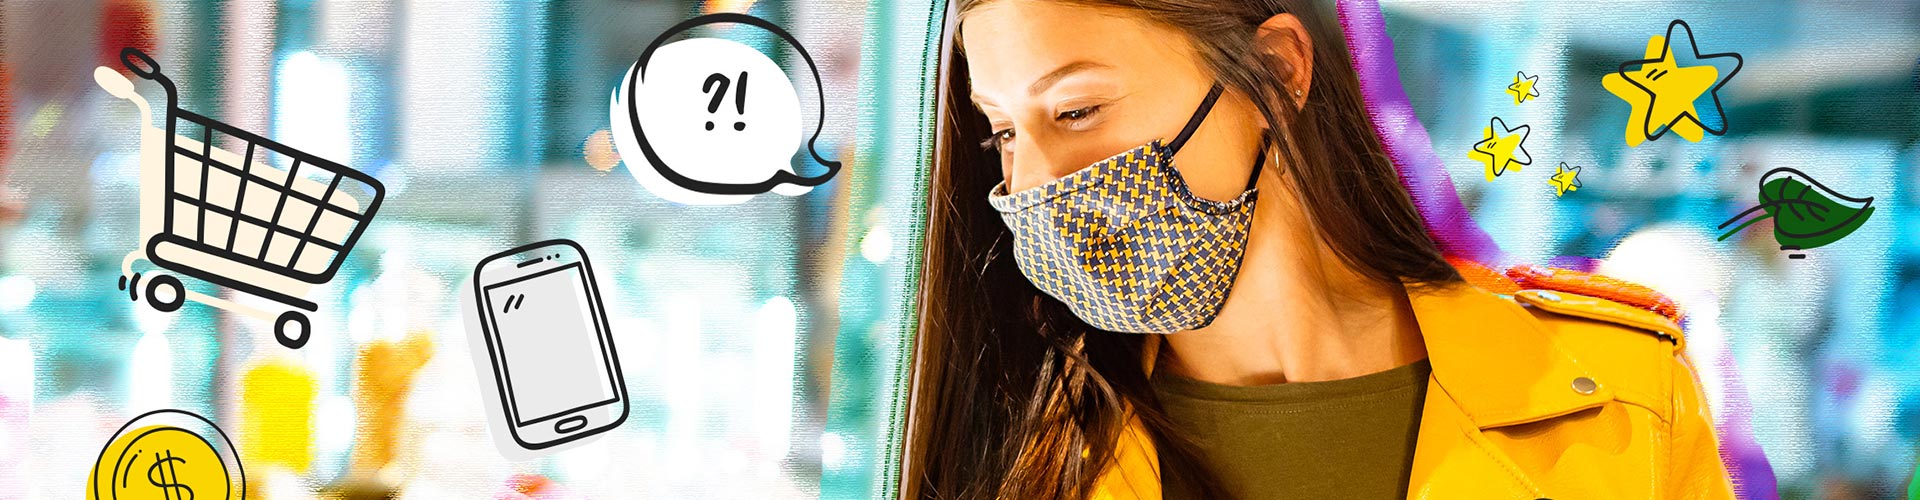 Gen Z woman wearing mask with shopping icons floating around her - banner